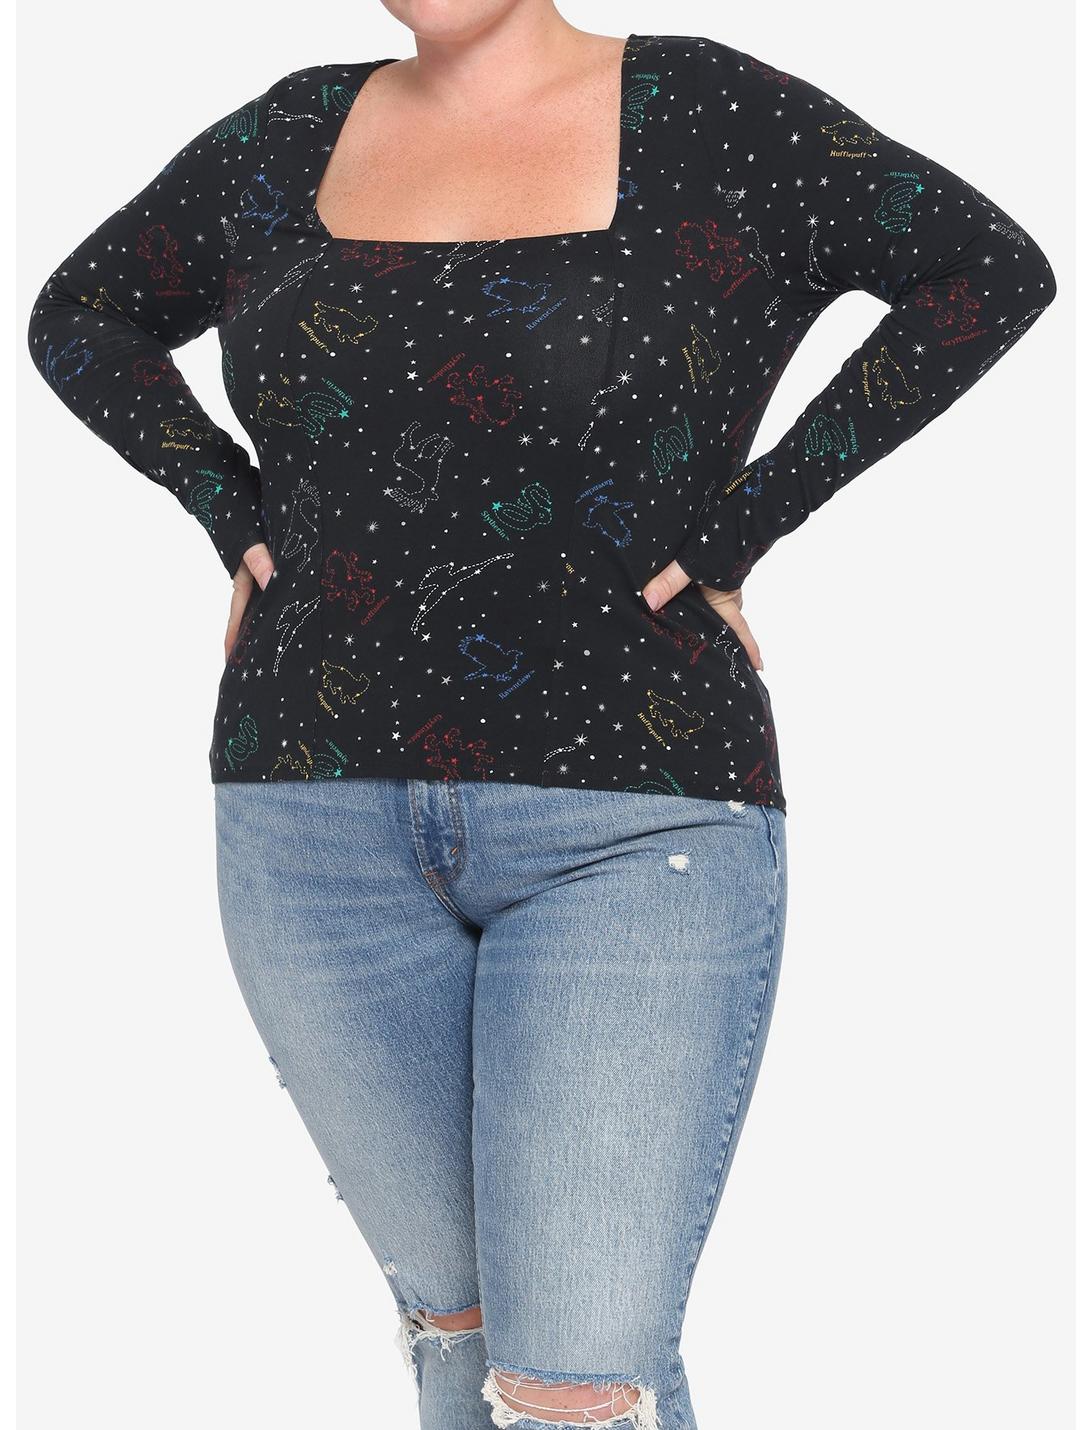 Harry Potter Constellation Girls Long-Sleeve Top Plus Size, MULTI, hi-res